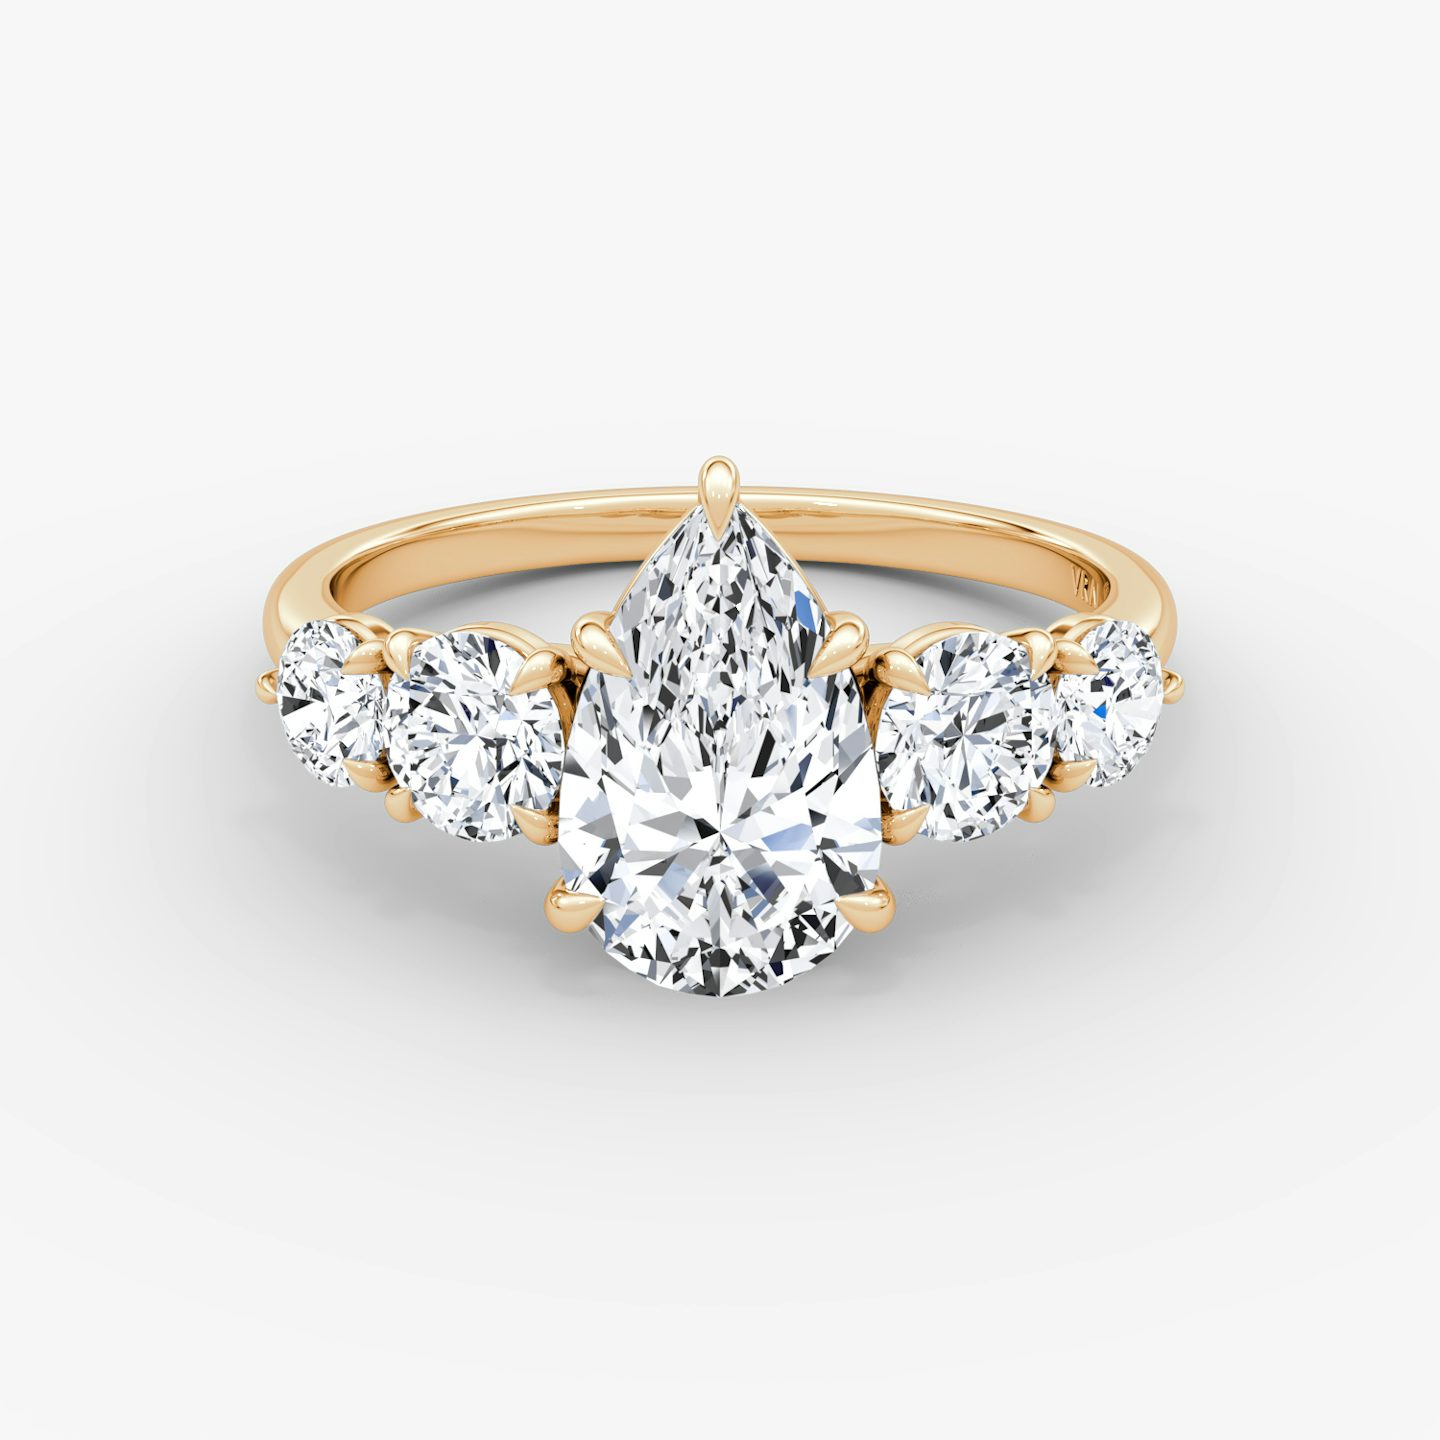 undefined | Poire | 14k | Or rose | bandAccent: Simple | diamondOrientation: vertical | caratWeight: other